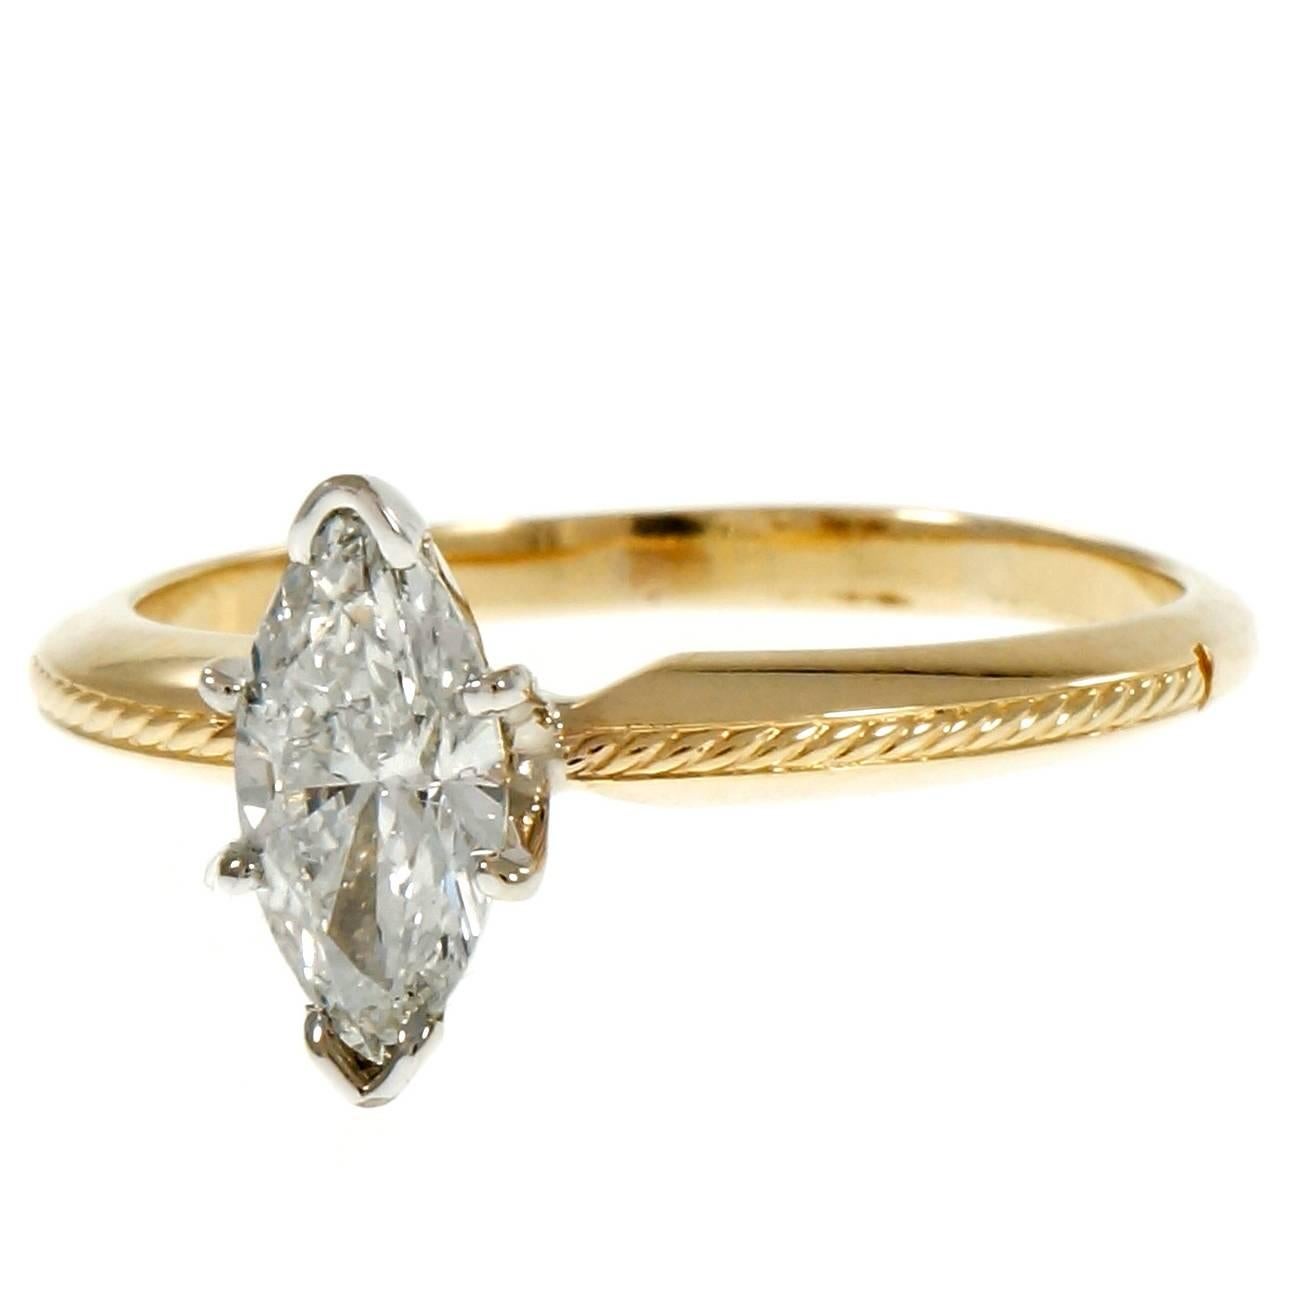 .80 carat Marquise diamond solitaire engagement ring in 14k yellow gold with a white gold top. GIA certified.

1 Marquise diamond, approx. total weight .80cts, F, SI2, GIA certificate #7213847115
Size 8.5 and sizable
14k yellow and white